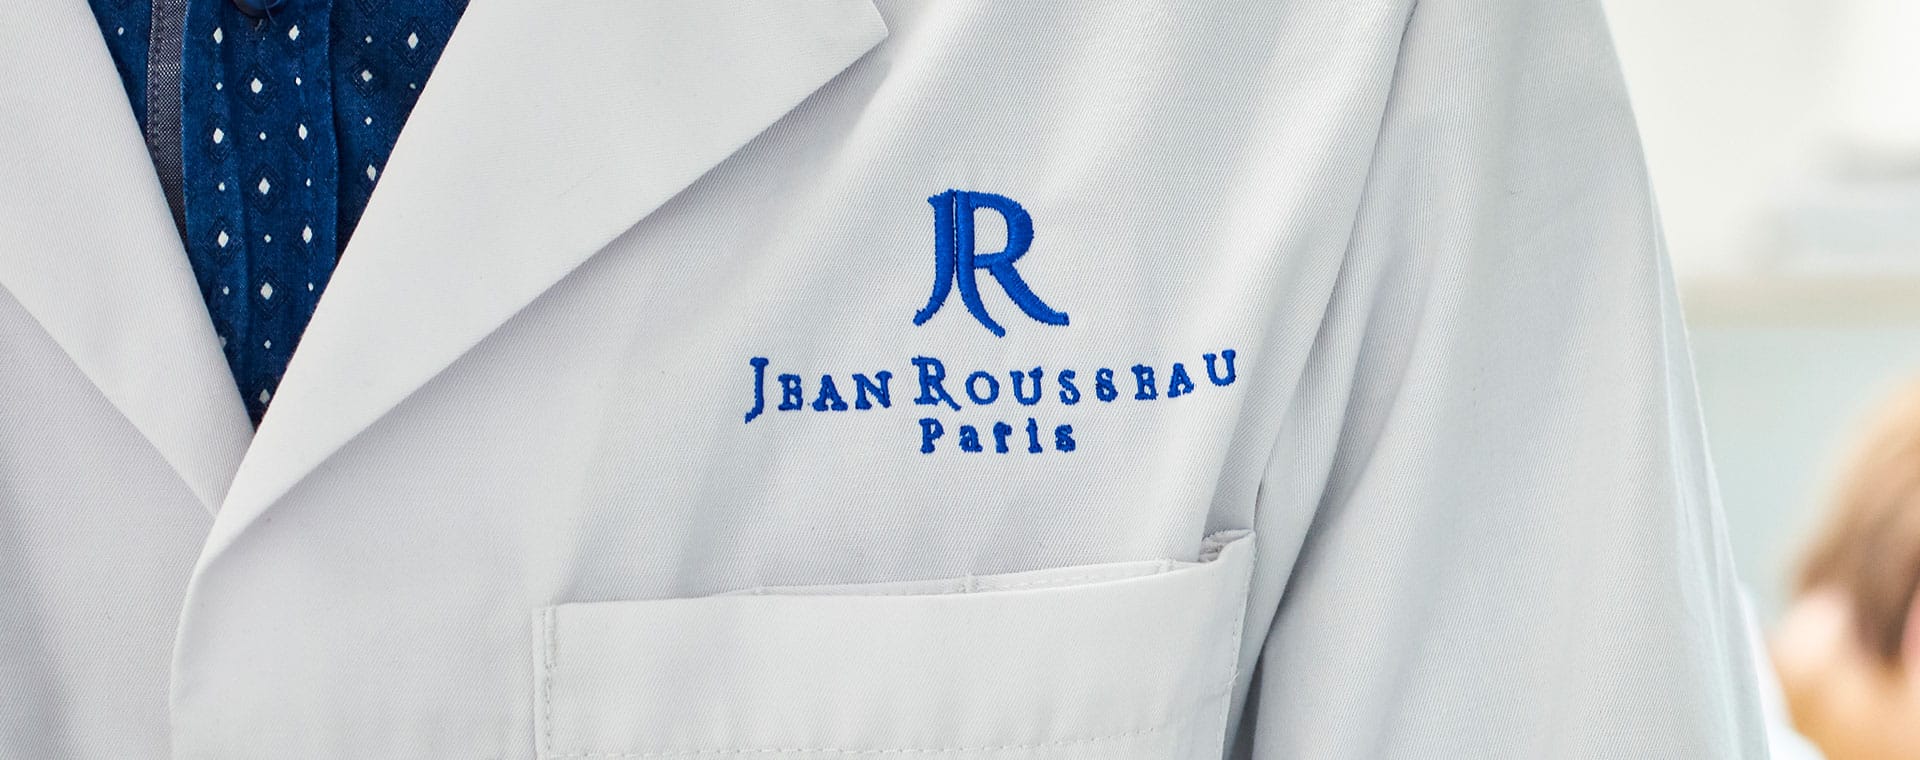 3 QUESTIONS TO MAHESH CHAUHAN, FINE LEATHER CRAFTSMAN AT JEAN ROUSSEAU